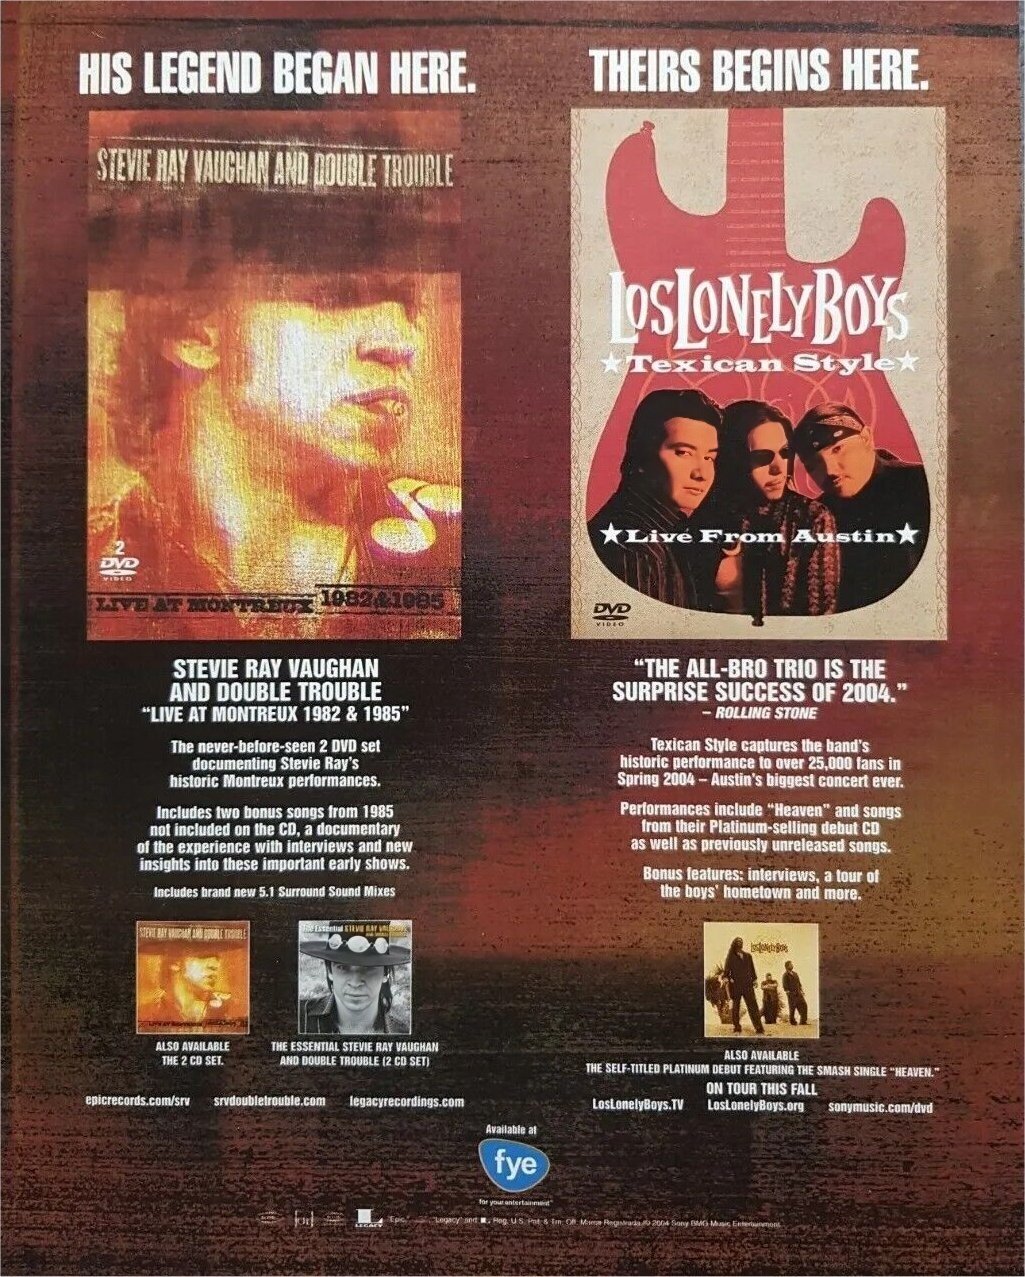 Live at Montreux DVD Advert